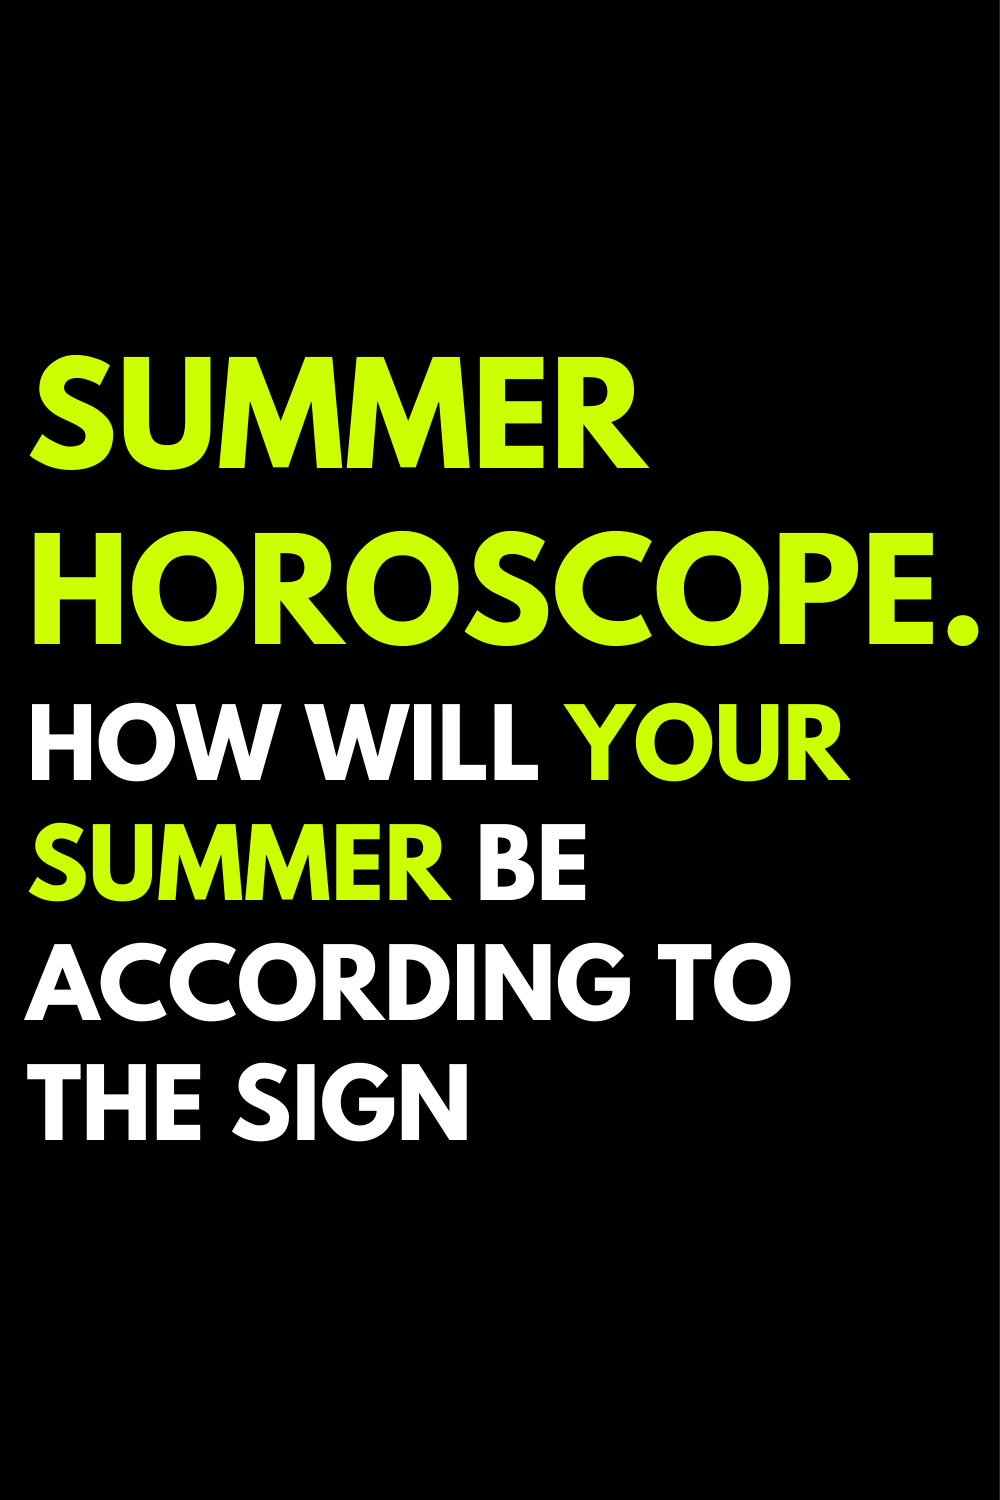 Summer horoscope. How will your summer be according to the sign